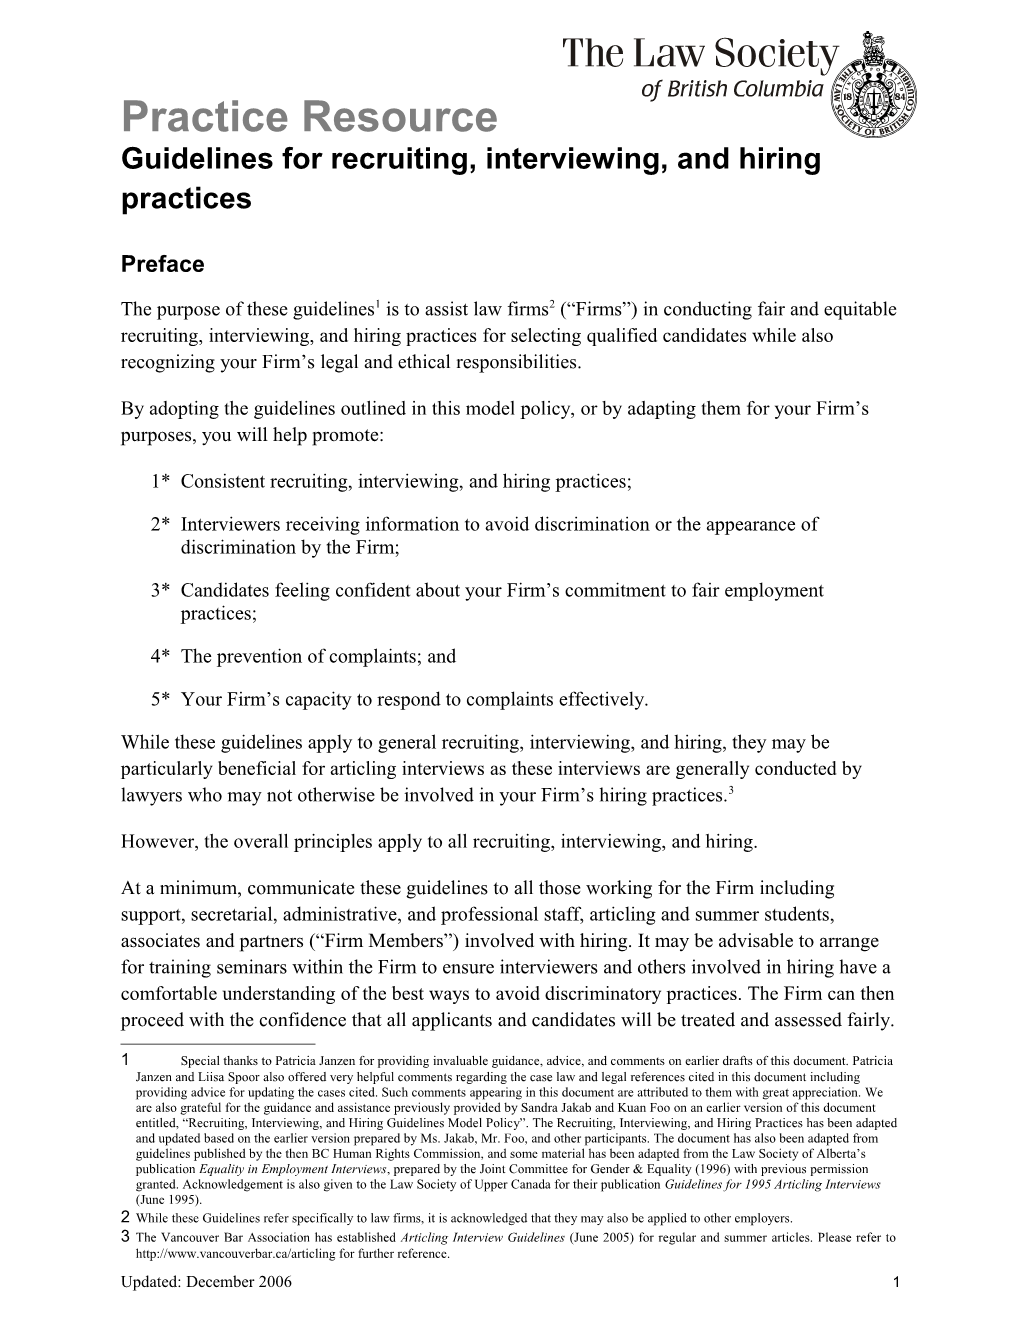 Practice Resource: Guidelines for Recruiting, Interviewing, and Hiring Practices